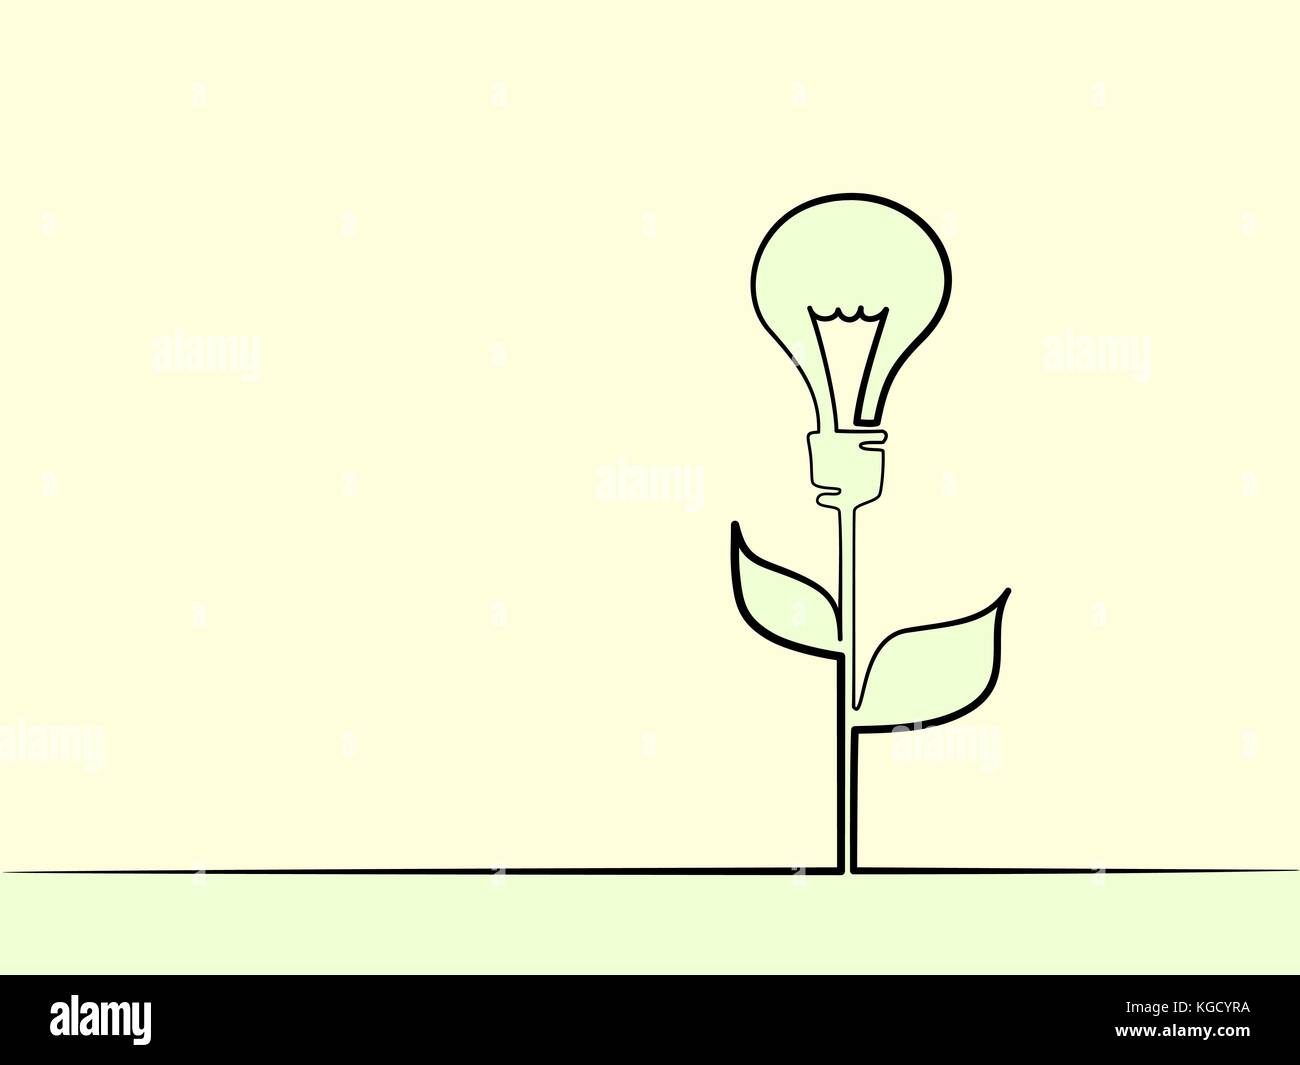 Continuous line drawing. Electic light bulb illuminated on stem of plant with leaves. Eco idea metaphor. Vector illustration Stock Vector